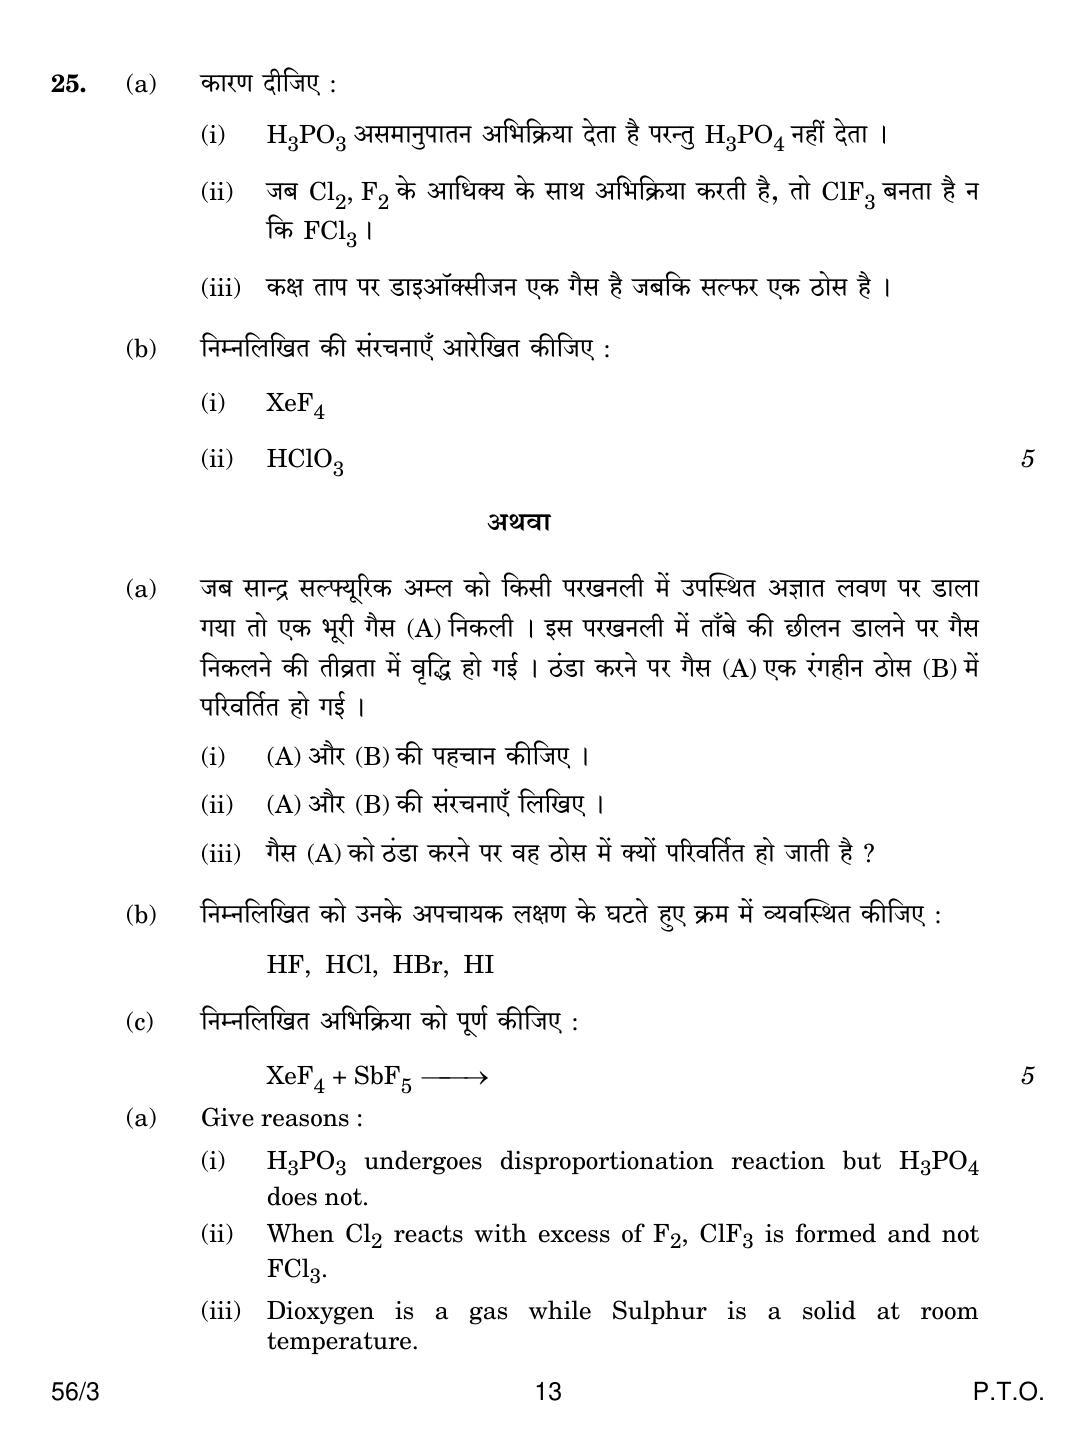 CBSE Class 12 56-3 CHEMISTRY 2018 Question Paper - Page 13